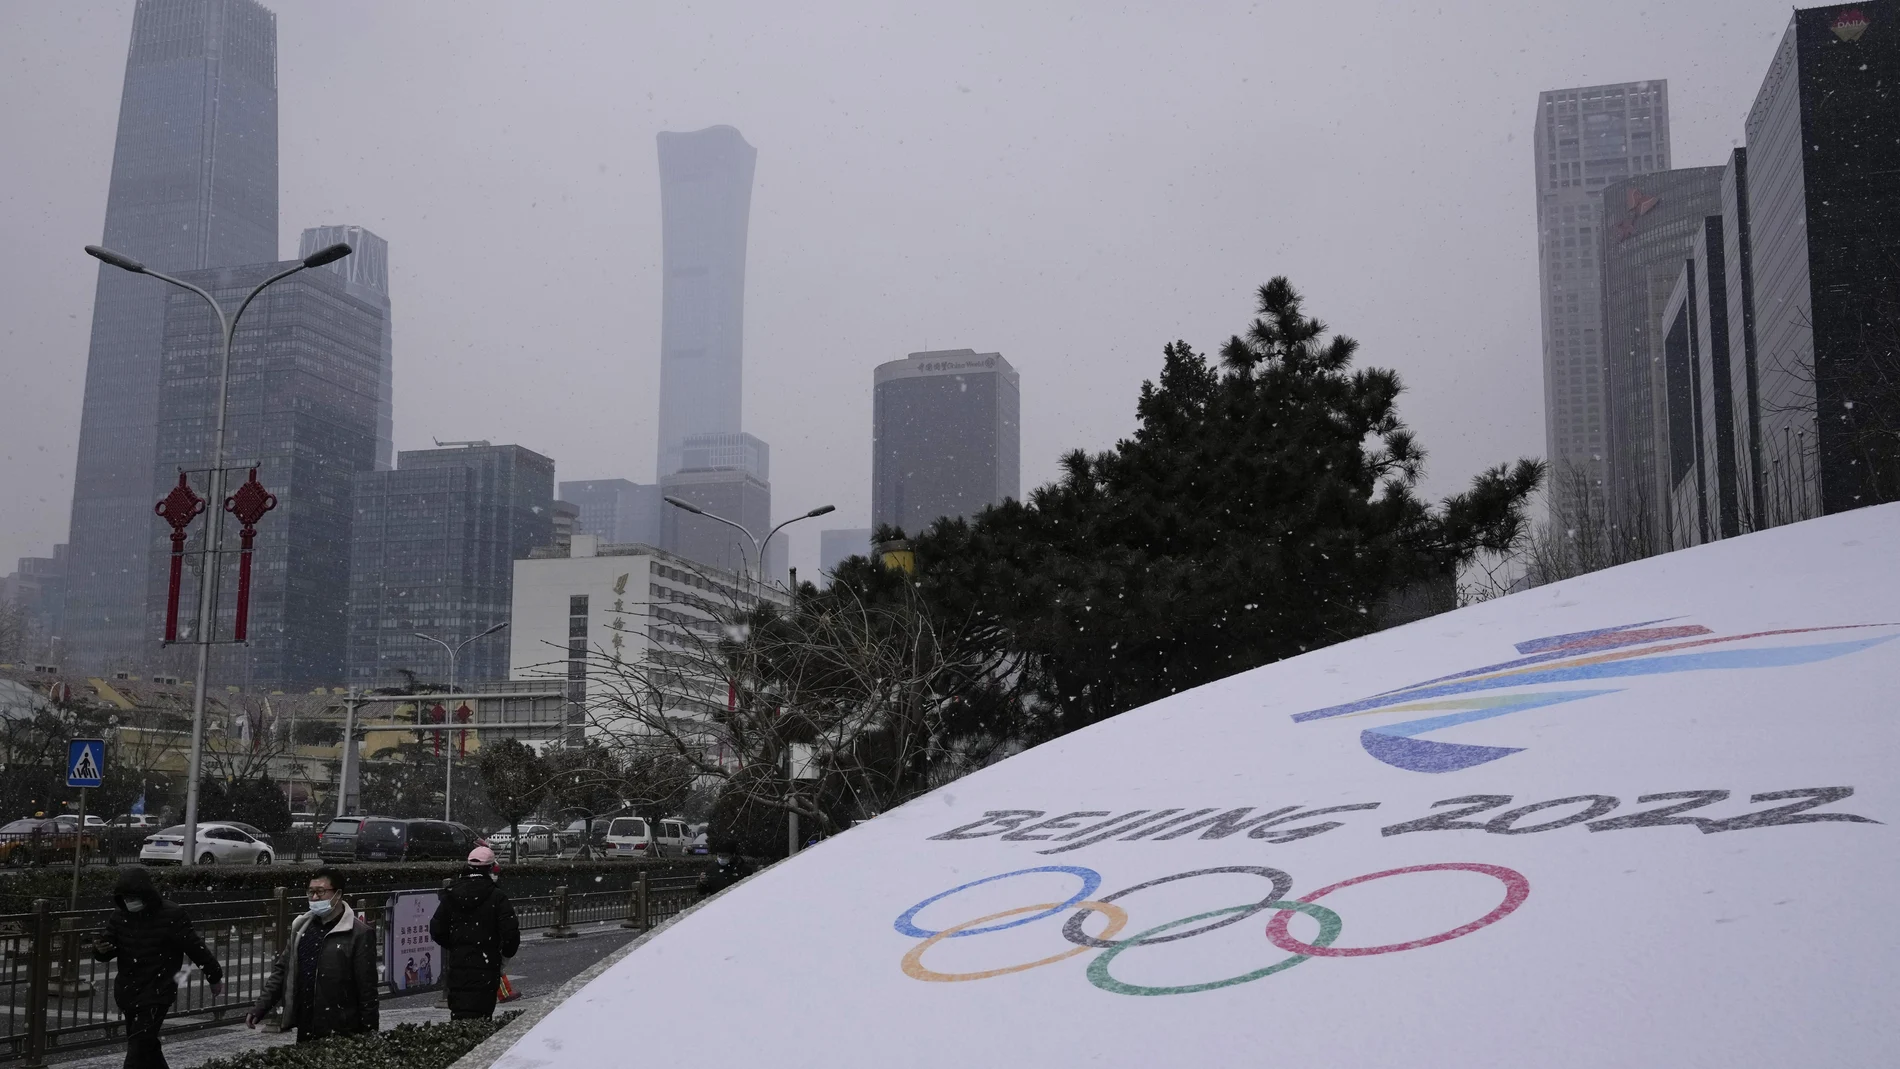 Residents walk past the Beijing Winter Olympics logo near the central business district in Beijing, China, Friday, Jan. 21, 2022. China is limiting the torch relay for the Winter Olympics to only three days amid coronavirus worries, organizers said Friday. (AP Photo/Ng Han Guan)